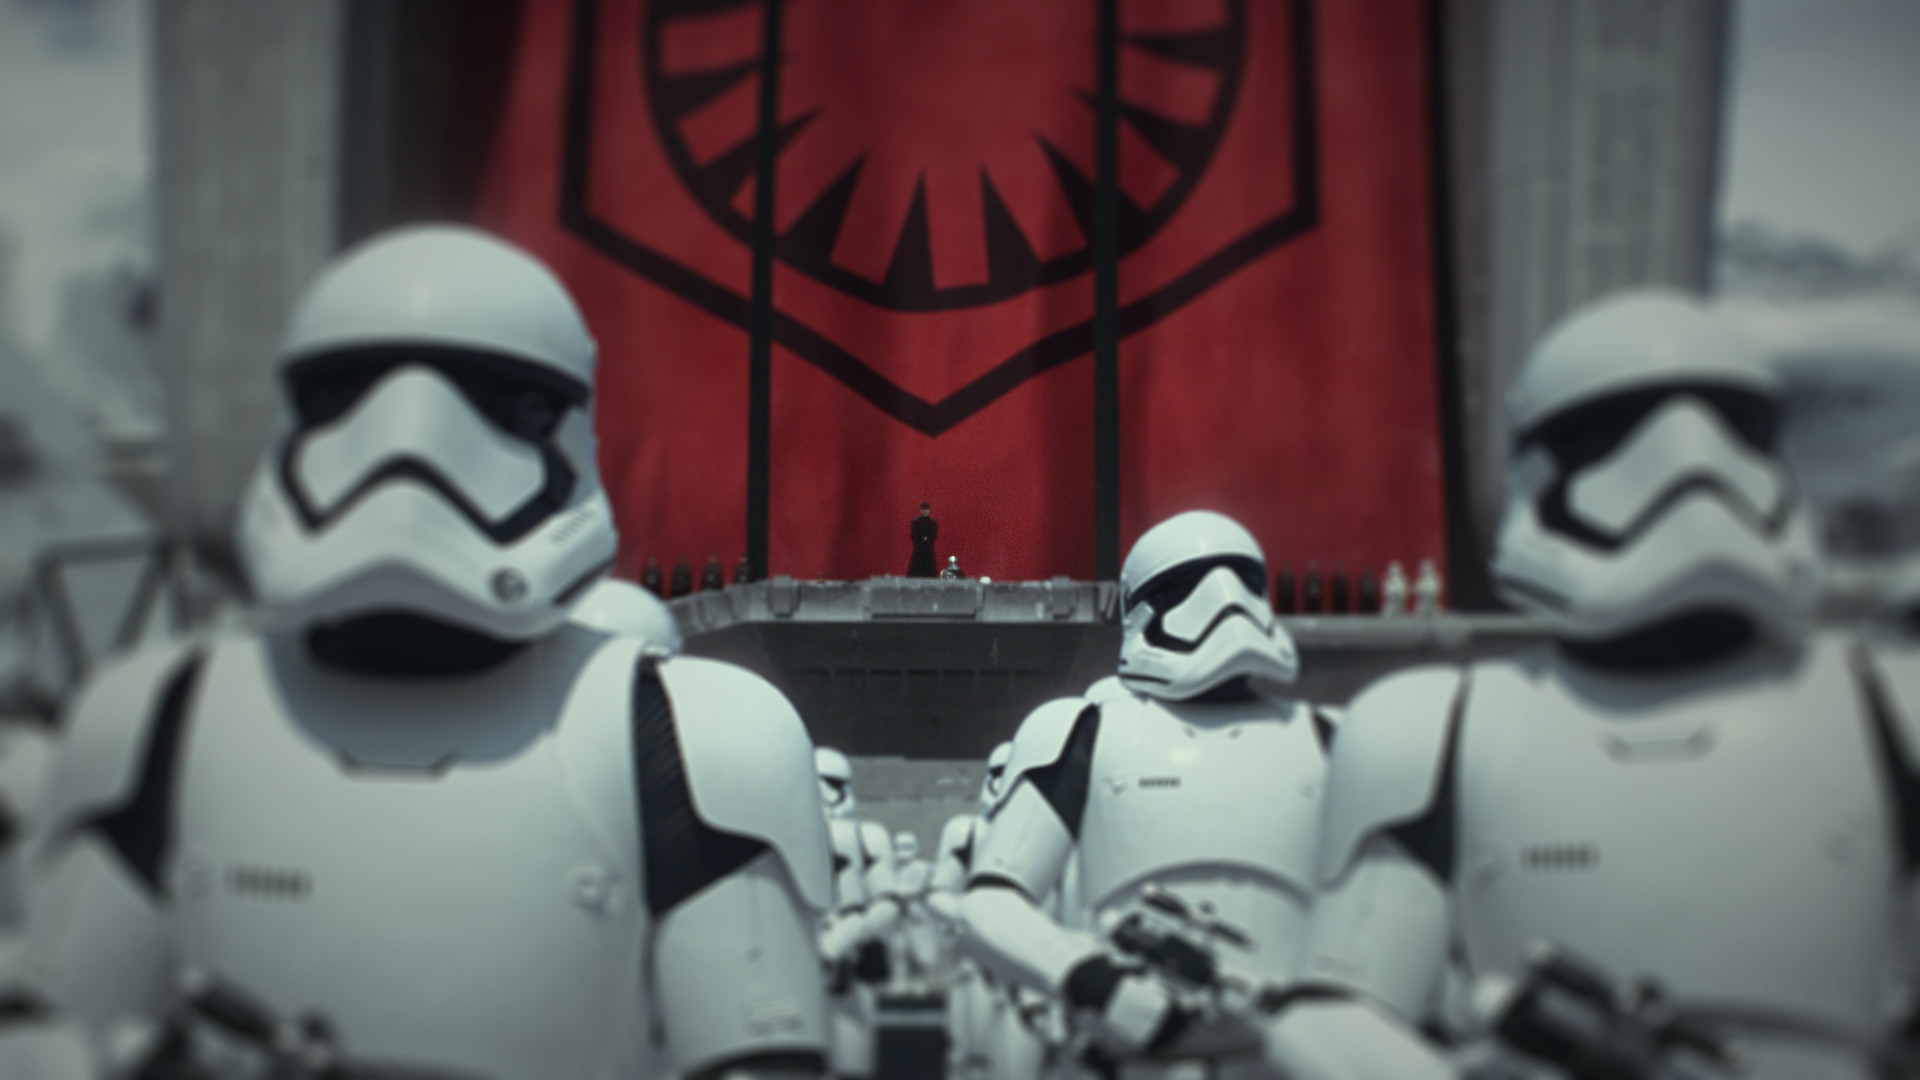 Star Wars Ep. 7 First Order wallpaper by PepperRoniLove